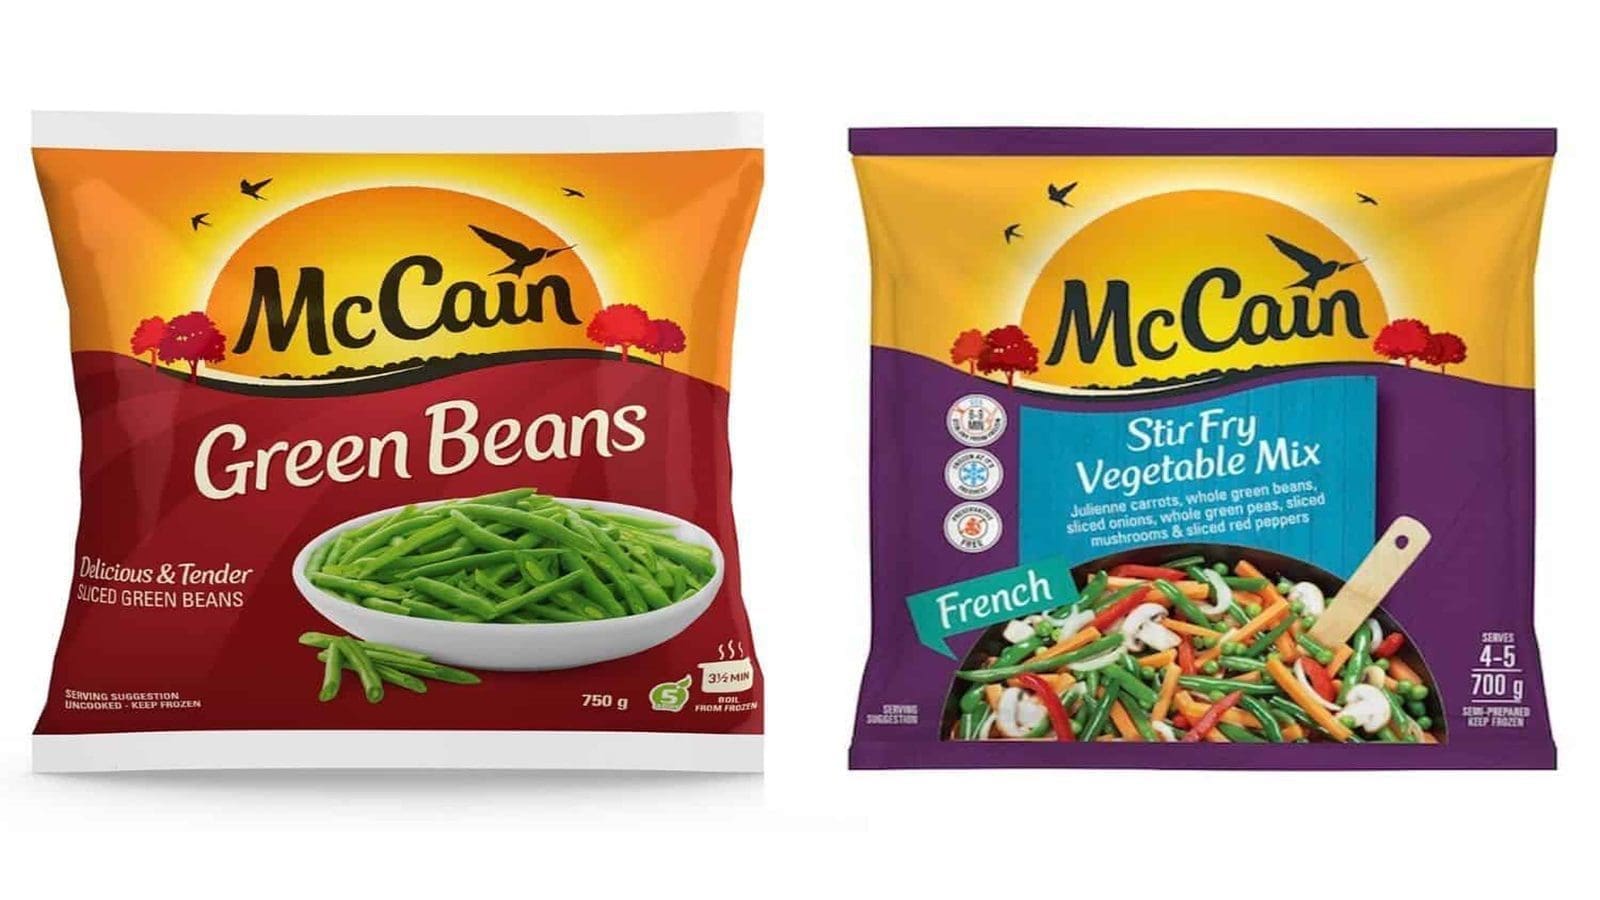 McCain Foods South Africa recalls frozen green beans, Spar-brand French stir fry citing glass contamination